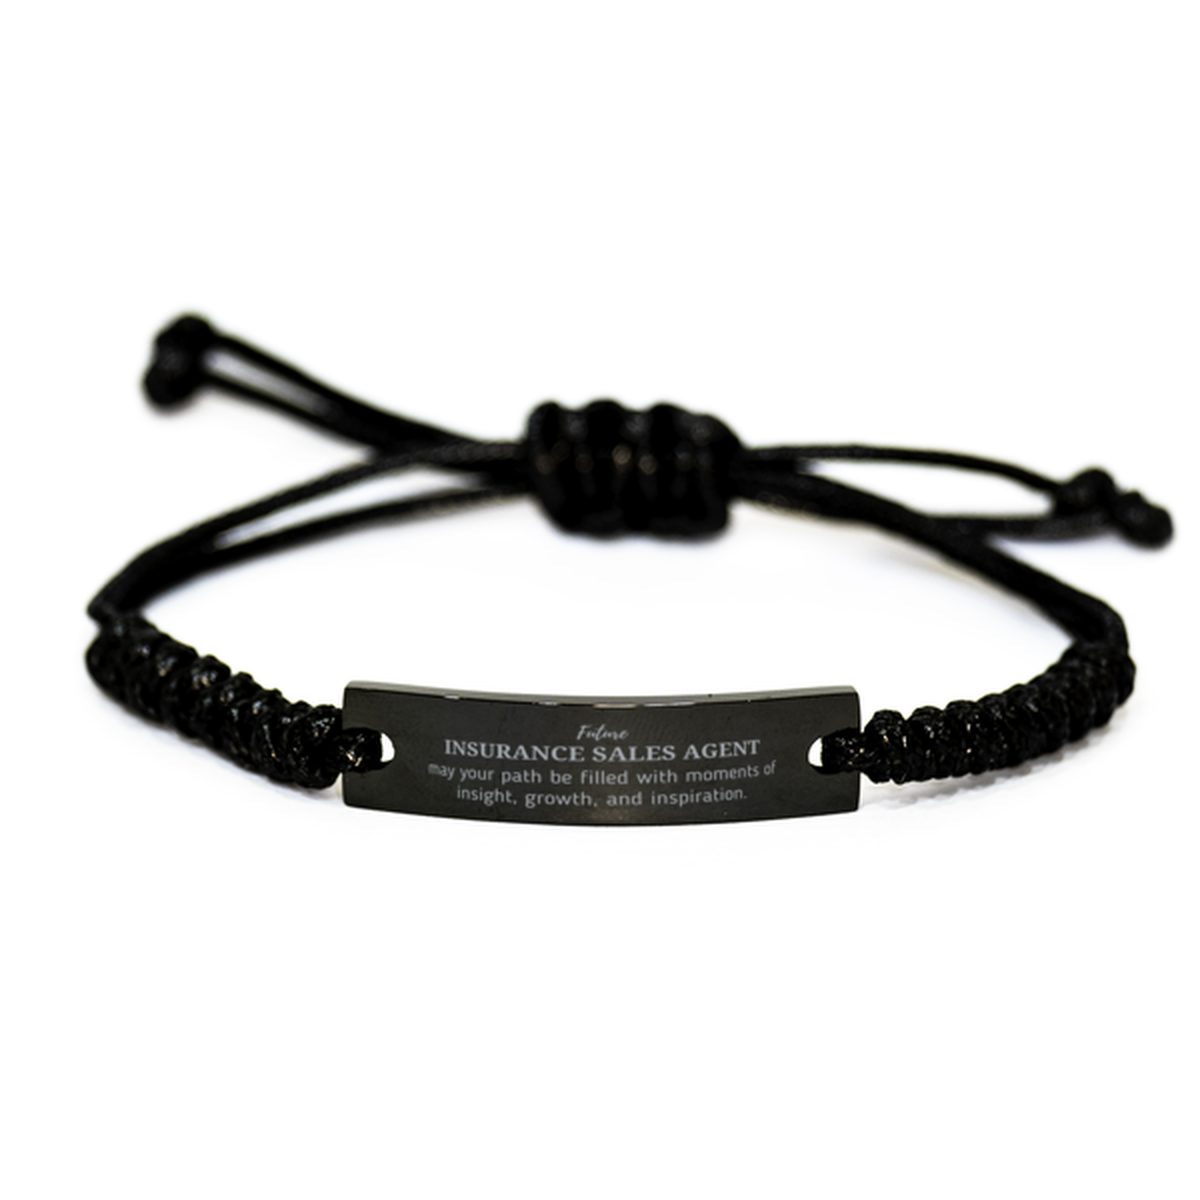 Future Insurance Sales Agent Gifts, May your path be filled with moments of insight, Graduation Gifts for New Insurance Sales Agent, Christmas Unique Black Rope Bracelet For Men, Women, Friends